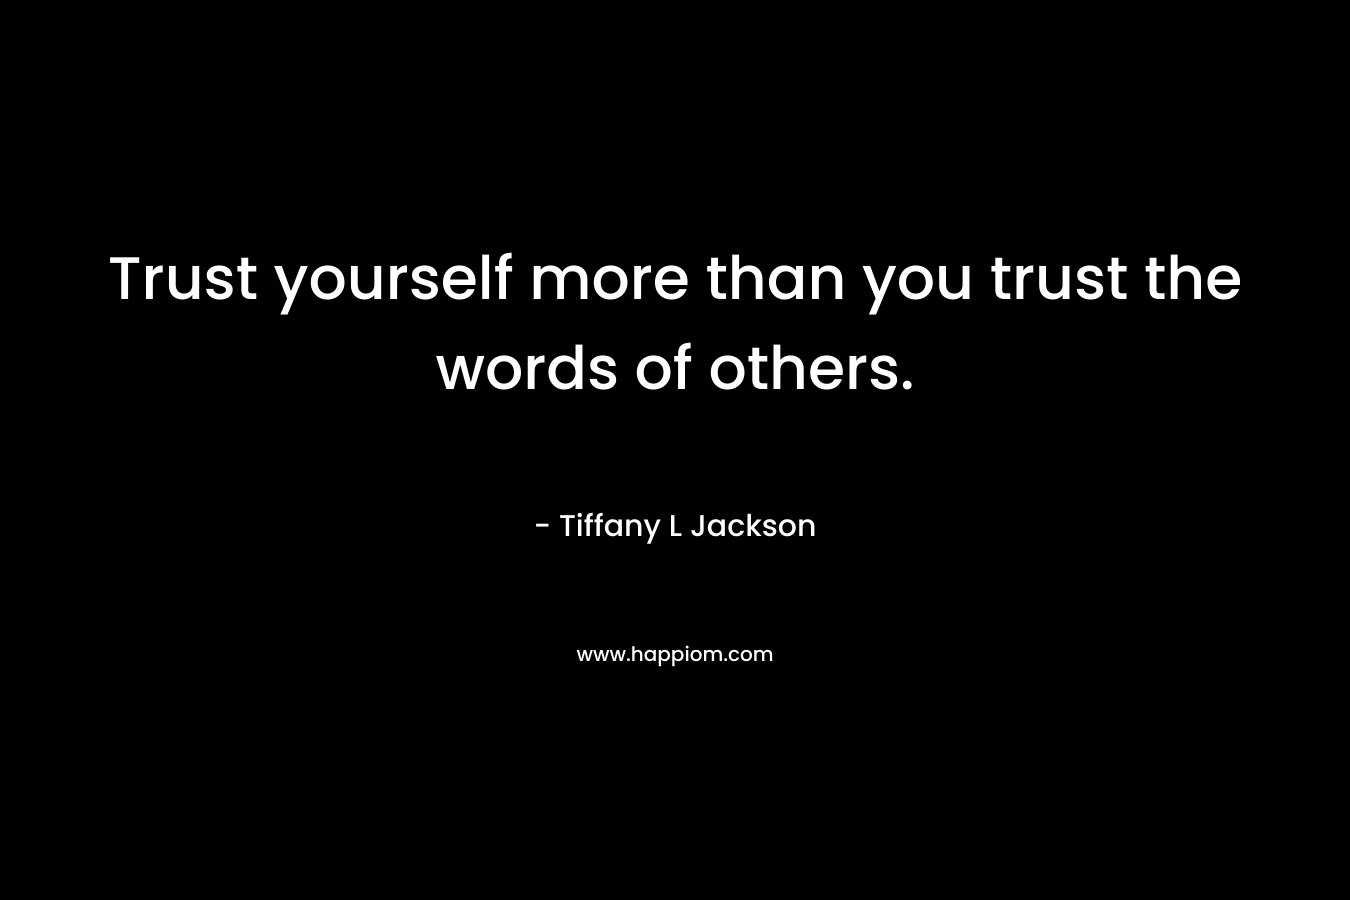 Trust yourself more than you trust the words of others.